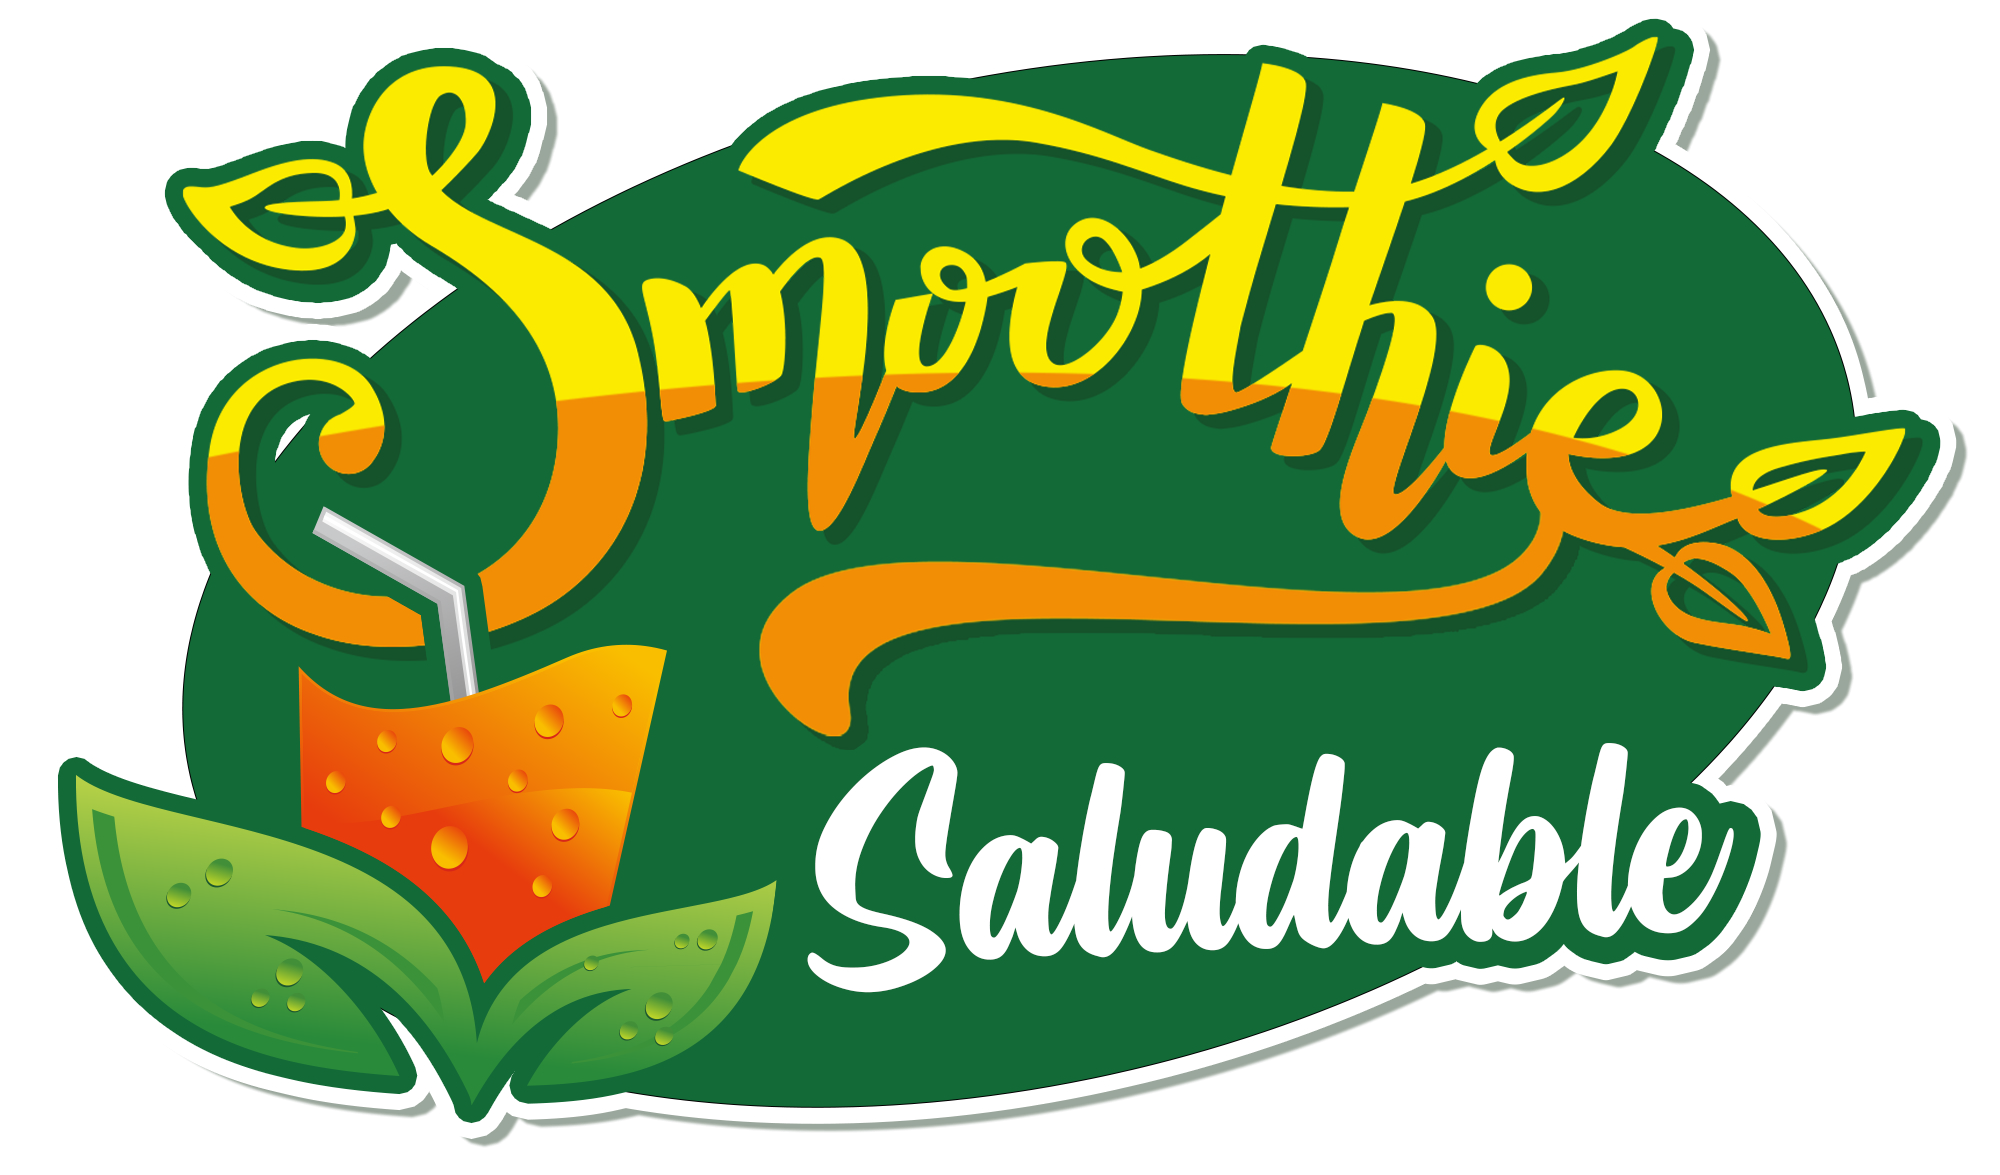 SmoothieSaludable